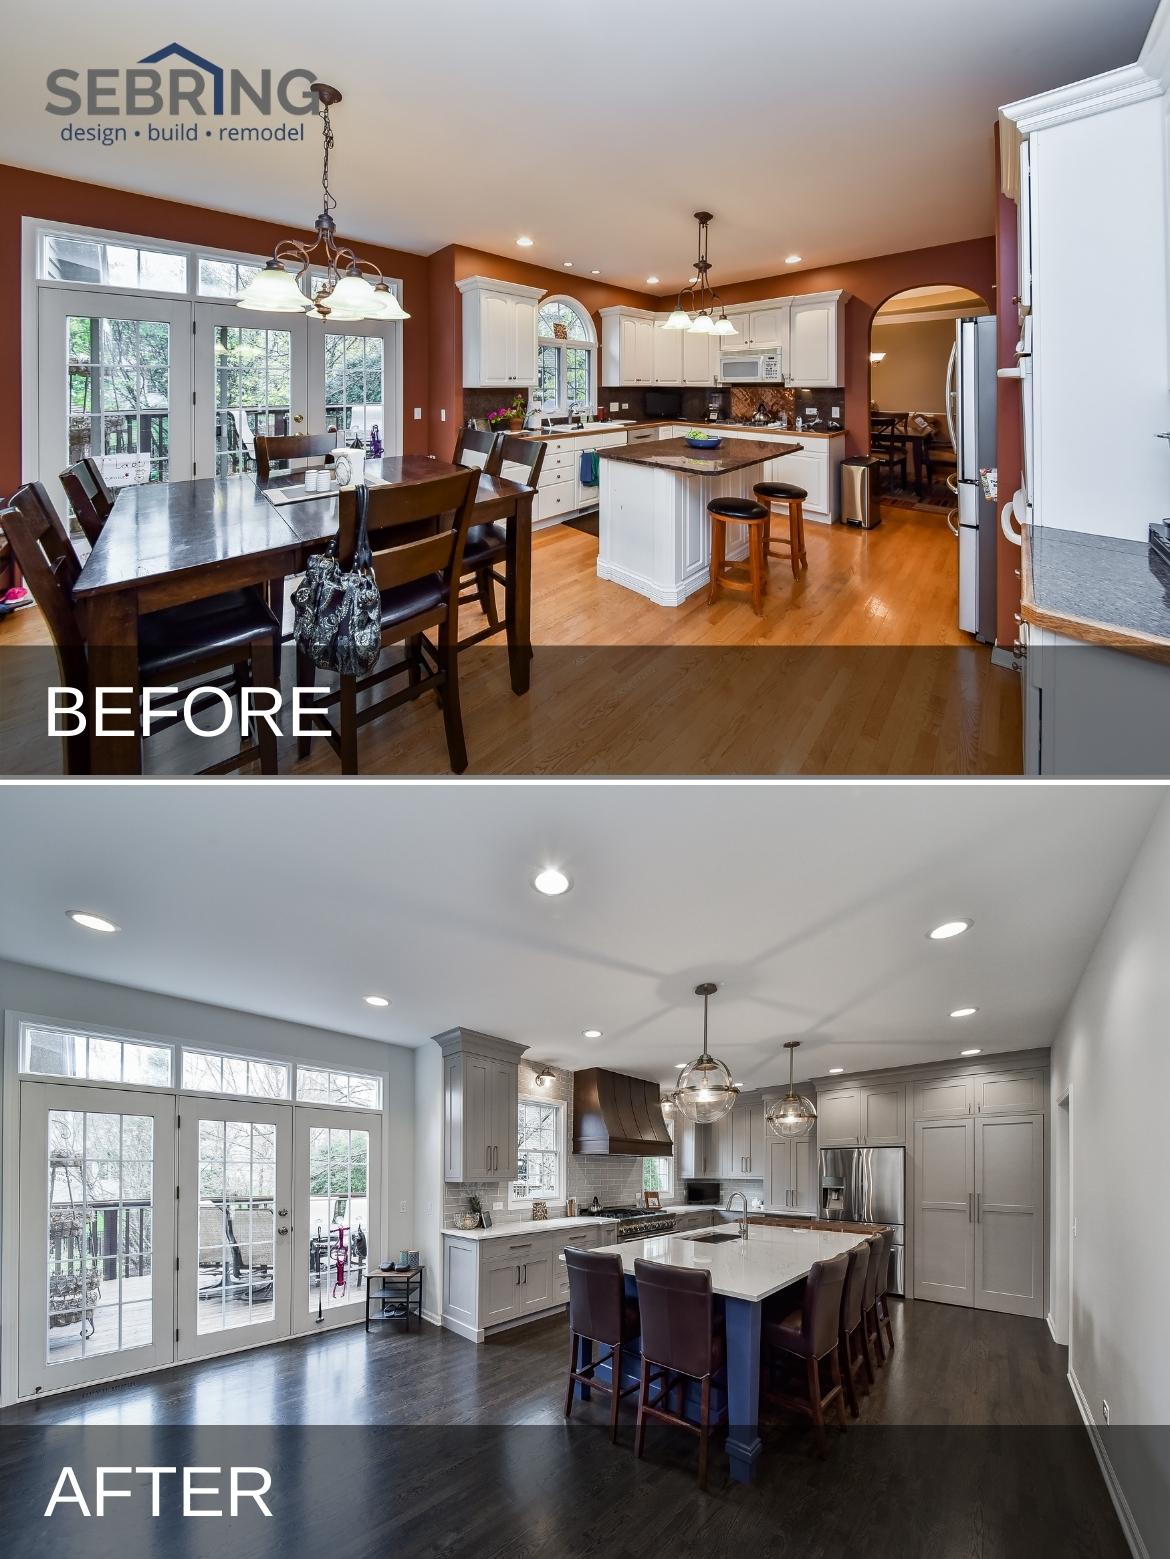 Kitchen Remodel Before & After Pictures